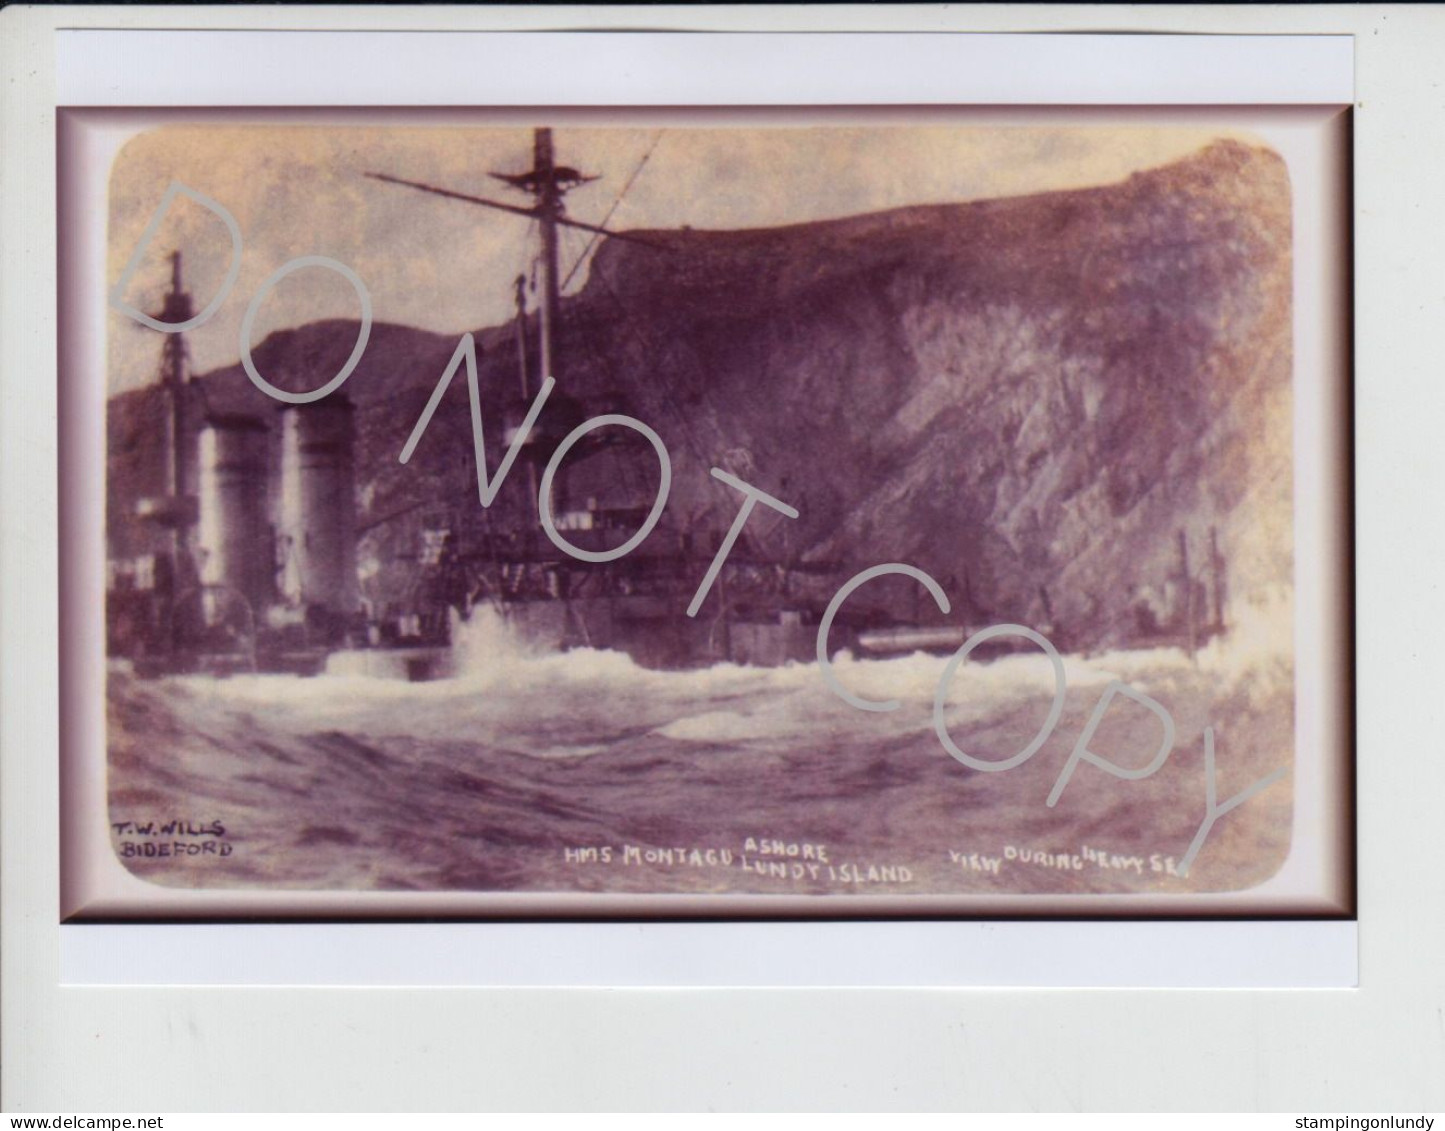 61. WI06. Four Lundy Island HMS Montague/Montagu Warship Produced By Wills Retirment Sale Price Slashed! - Guerra, Militari